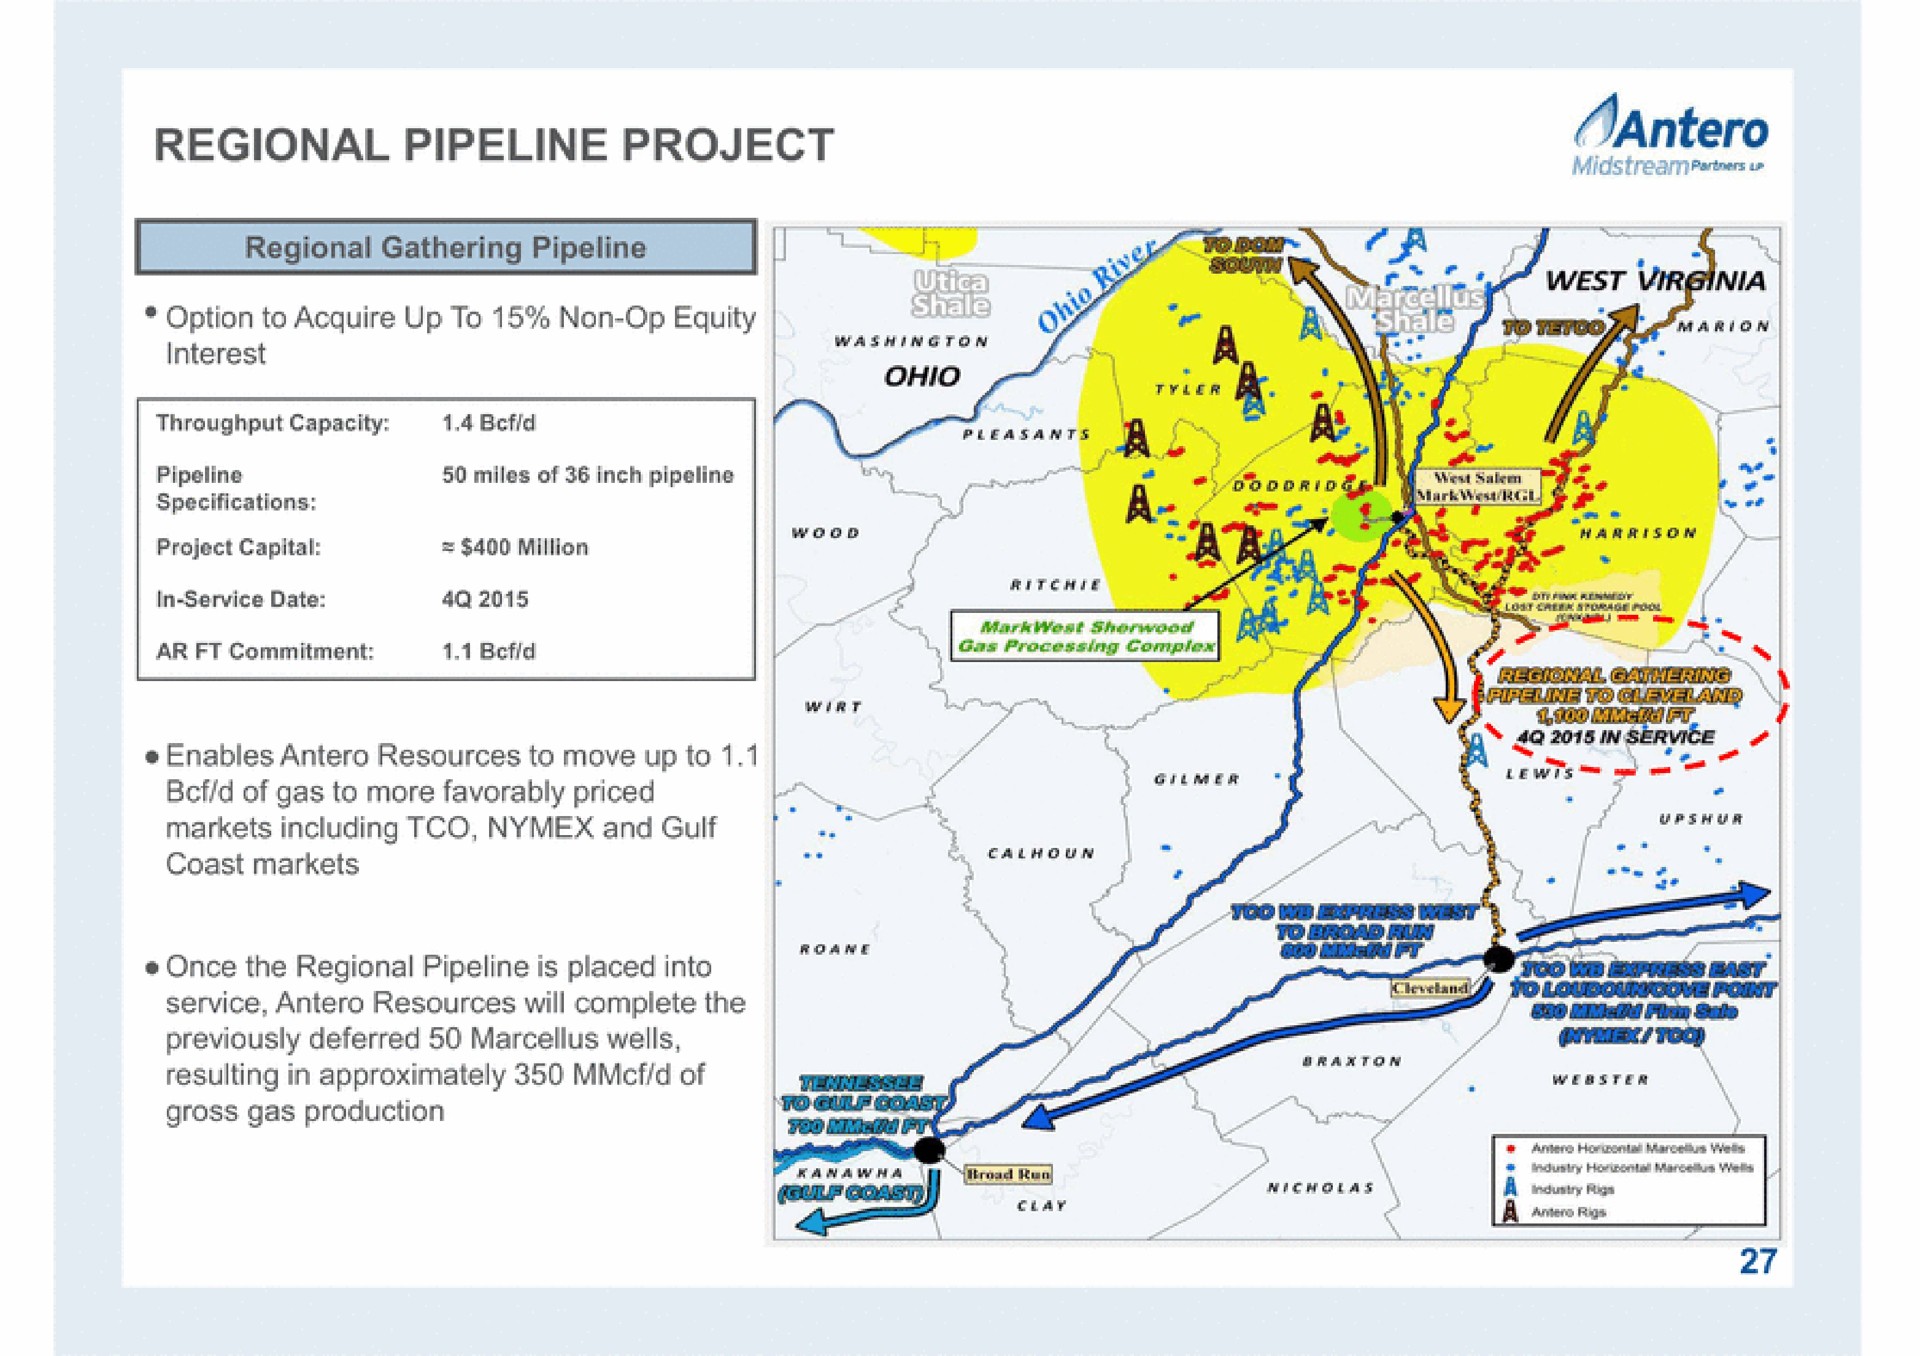 regional pipeline project regional gathering pipeline a project capital in service date million pies a my a i | Antero Midstream Partners